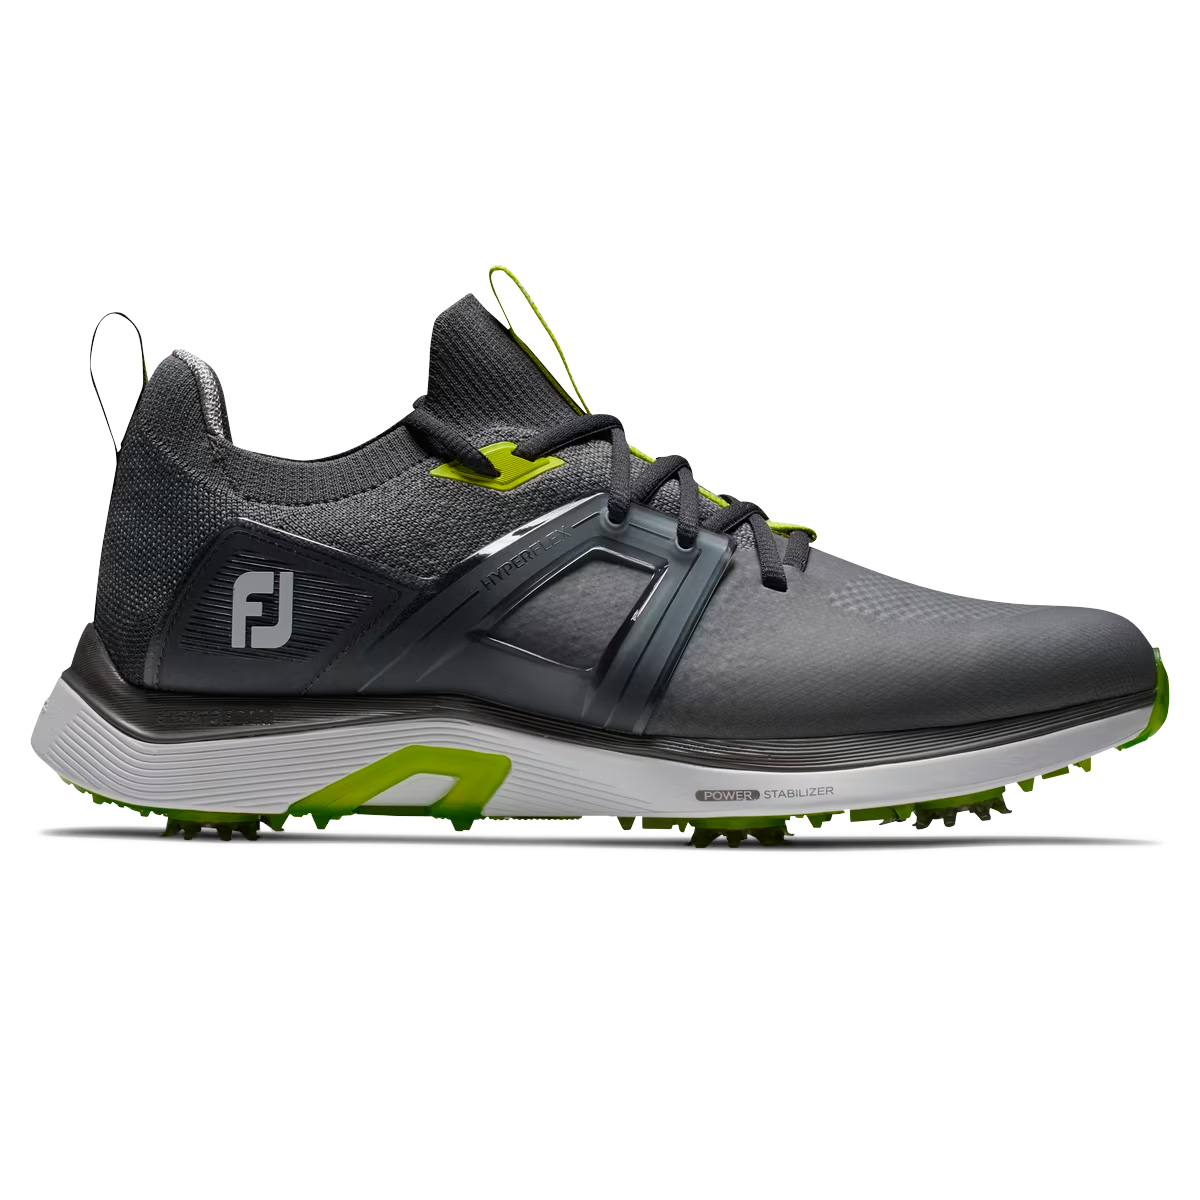 FootJoy Hyperflex Mens Spiked Golf Shoes  - Charcoal/Grey/Lime